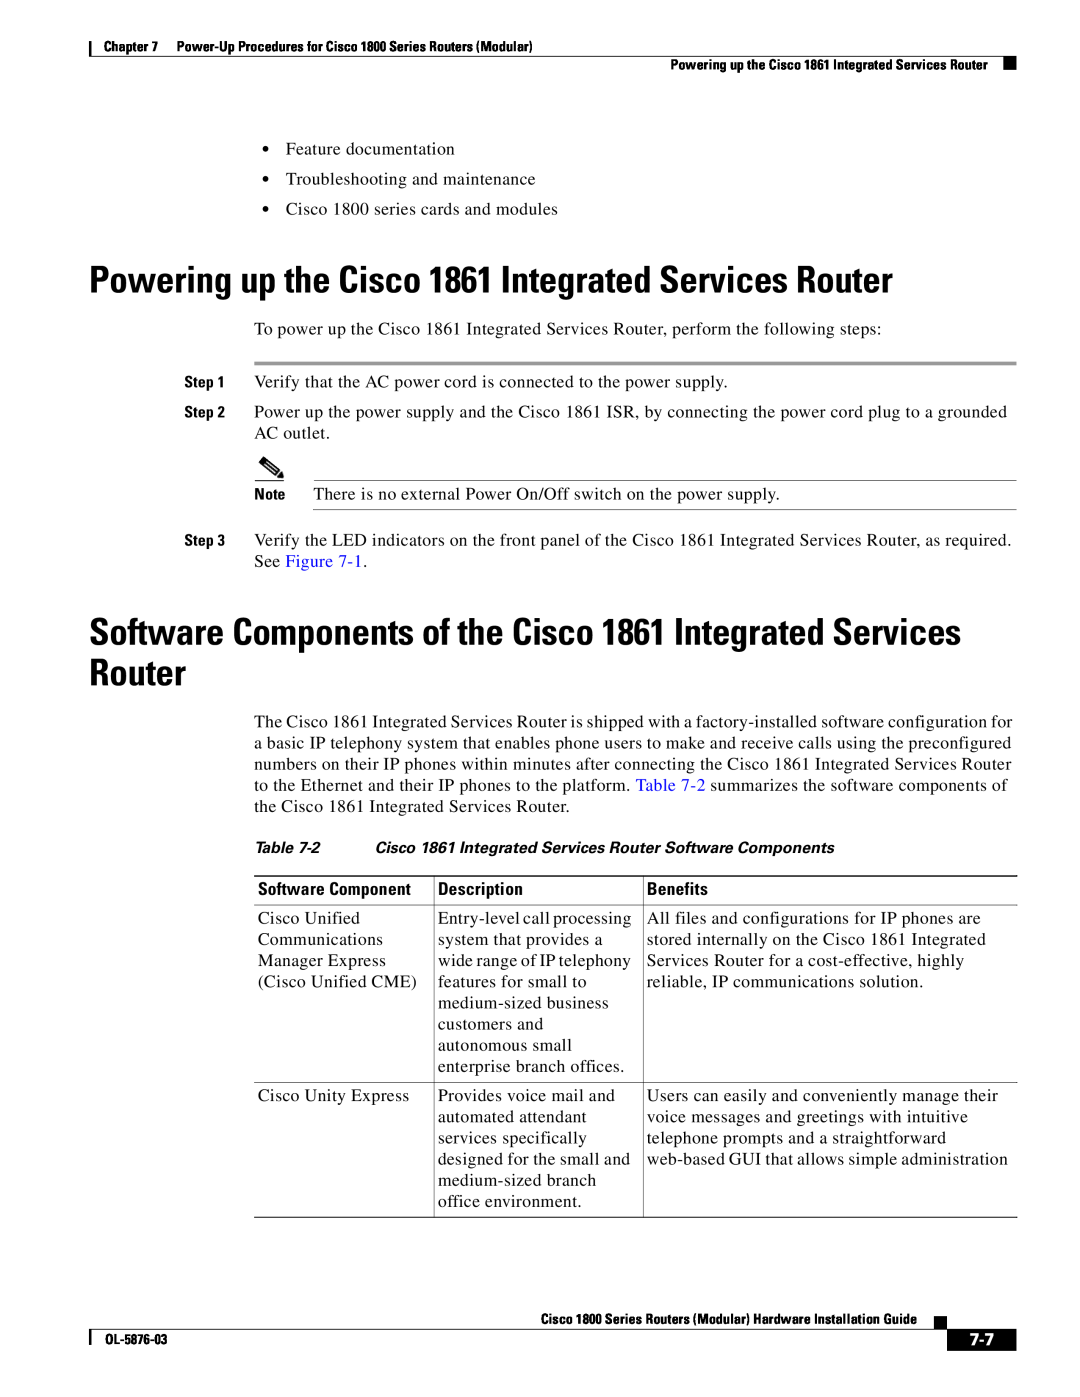 Cisco Systems CISCO1841-HSEC/K9-RF manual Powering up the Cisco 1861 Integrated Services Router 